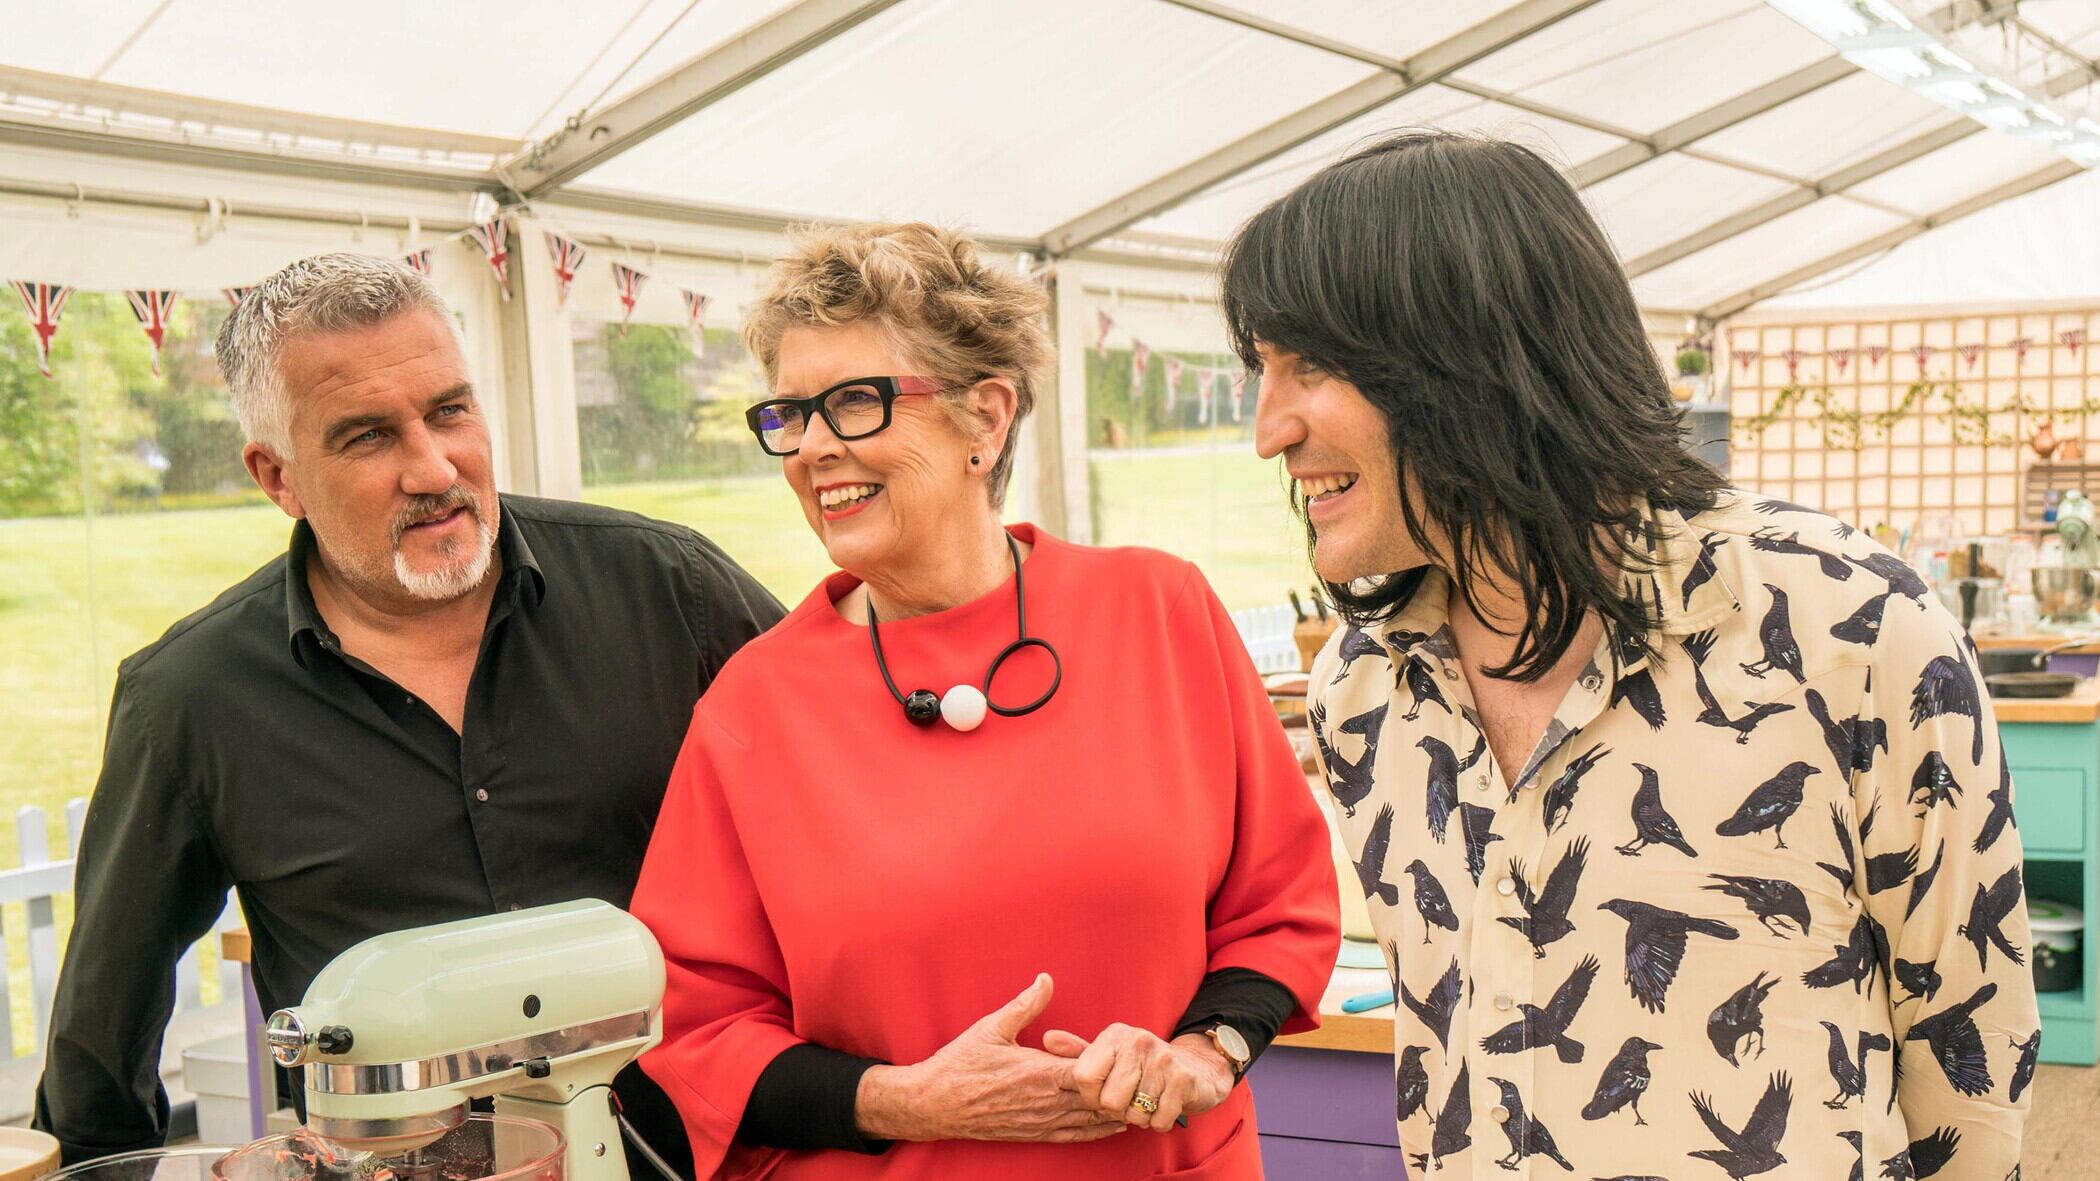 The Great British Bake Off judges Paul Hollywood, Dame Prue Leith and presenter Noel Fielding (Channel 4/PA)